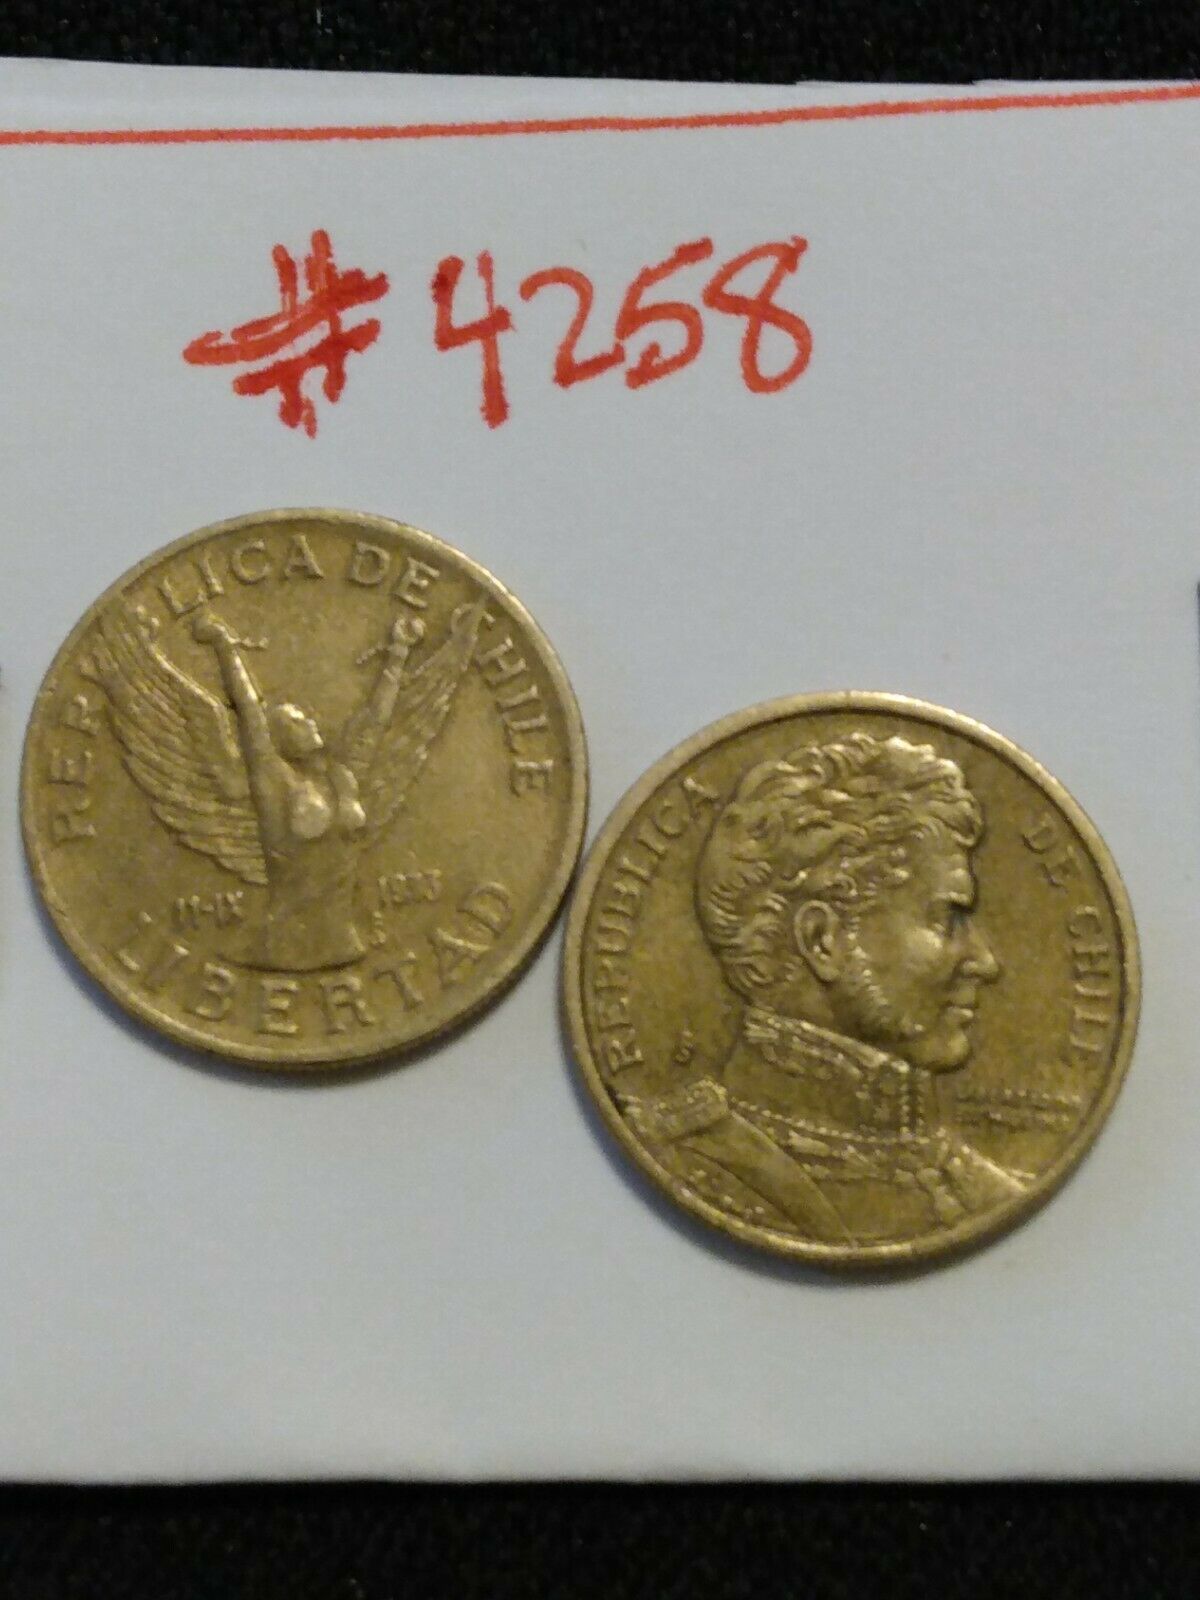 🇨🇱🇨🇱🇨🇱 1989 & 2000 Chile 10 Pesos Coins, 2 Styles 🇨🇱🇨🇱🇨🇱